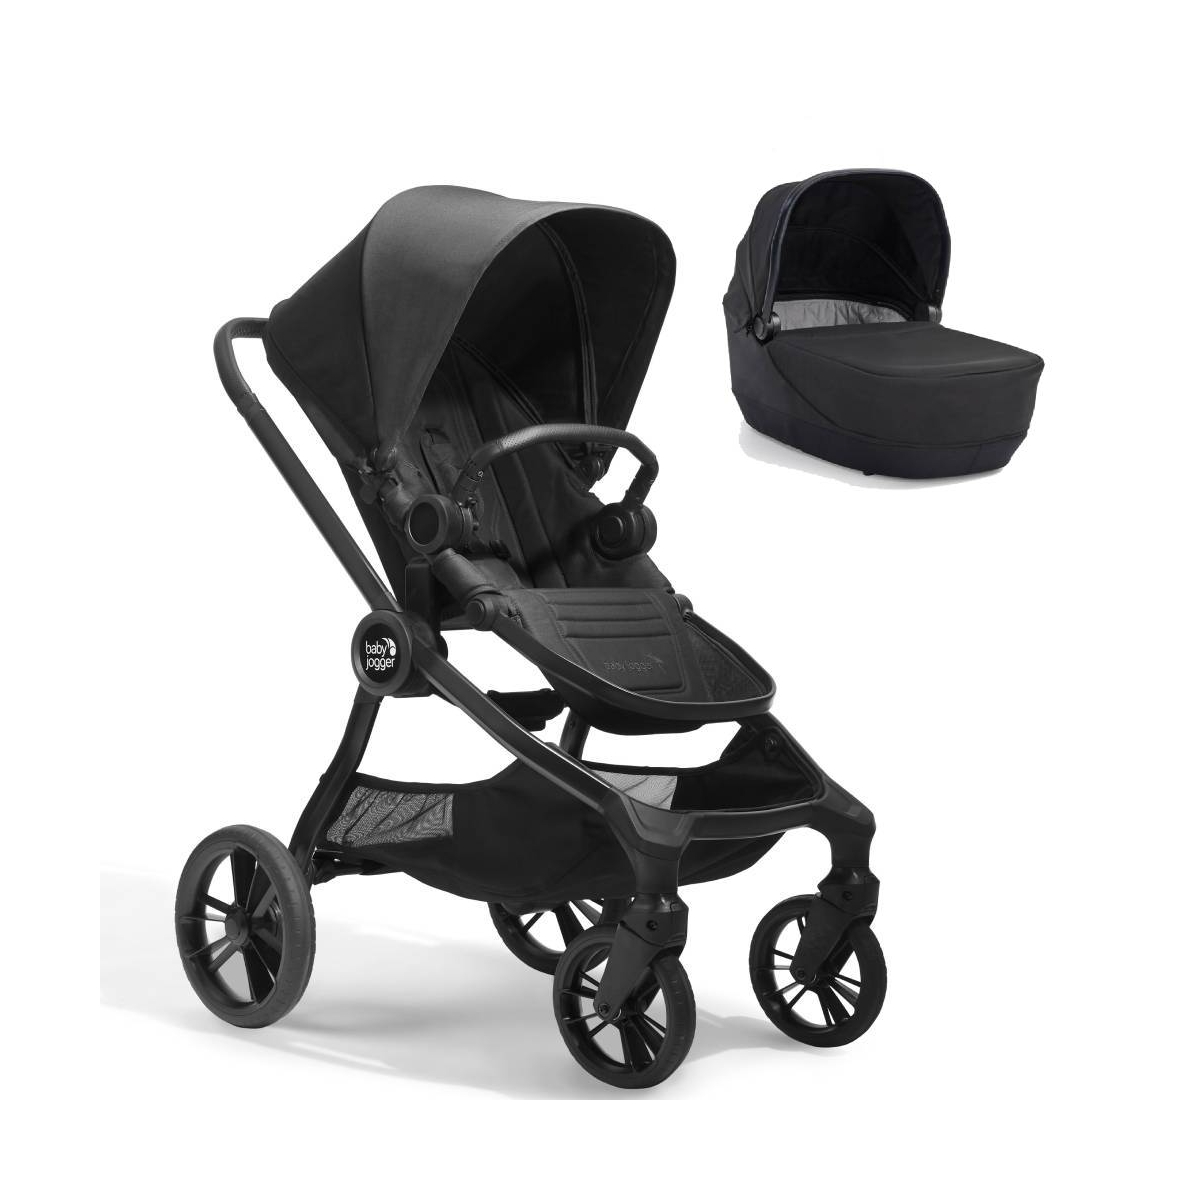 Baby Jogger City Sights 2in1 Travel System